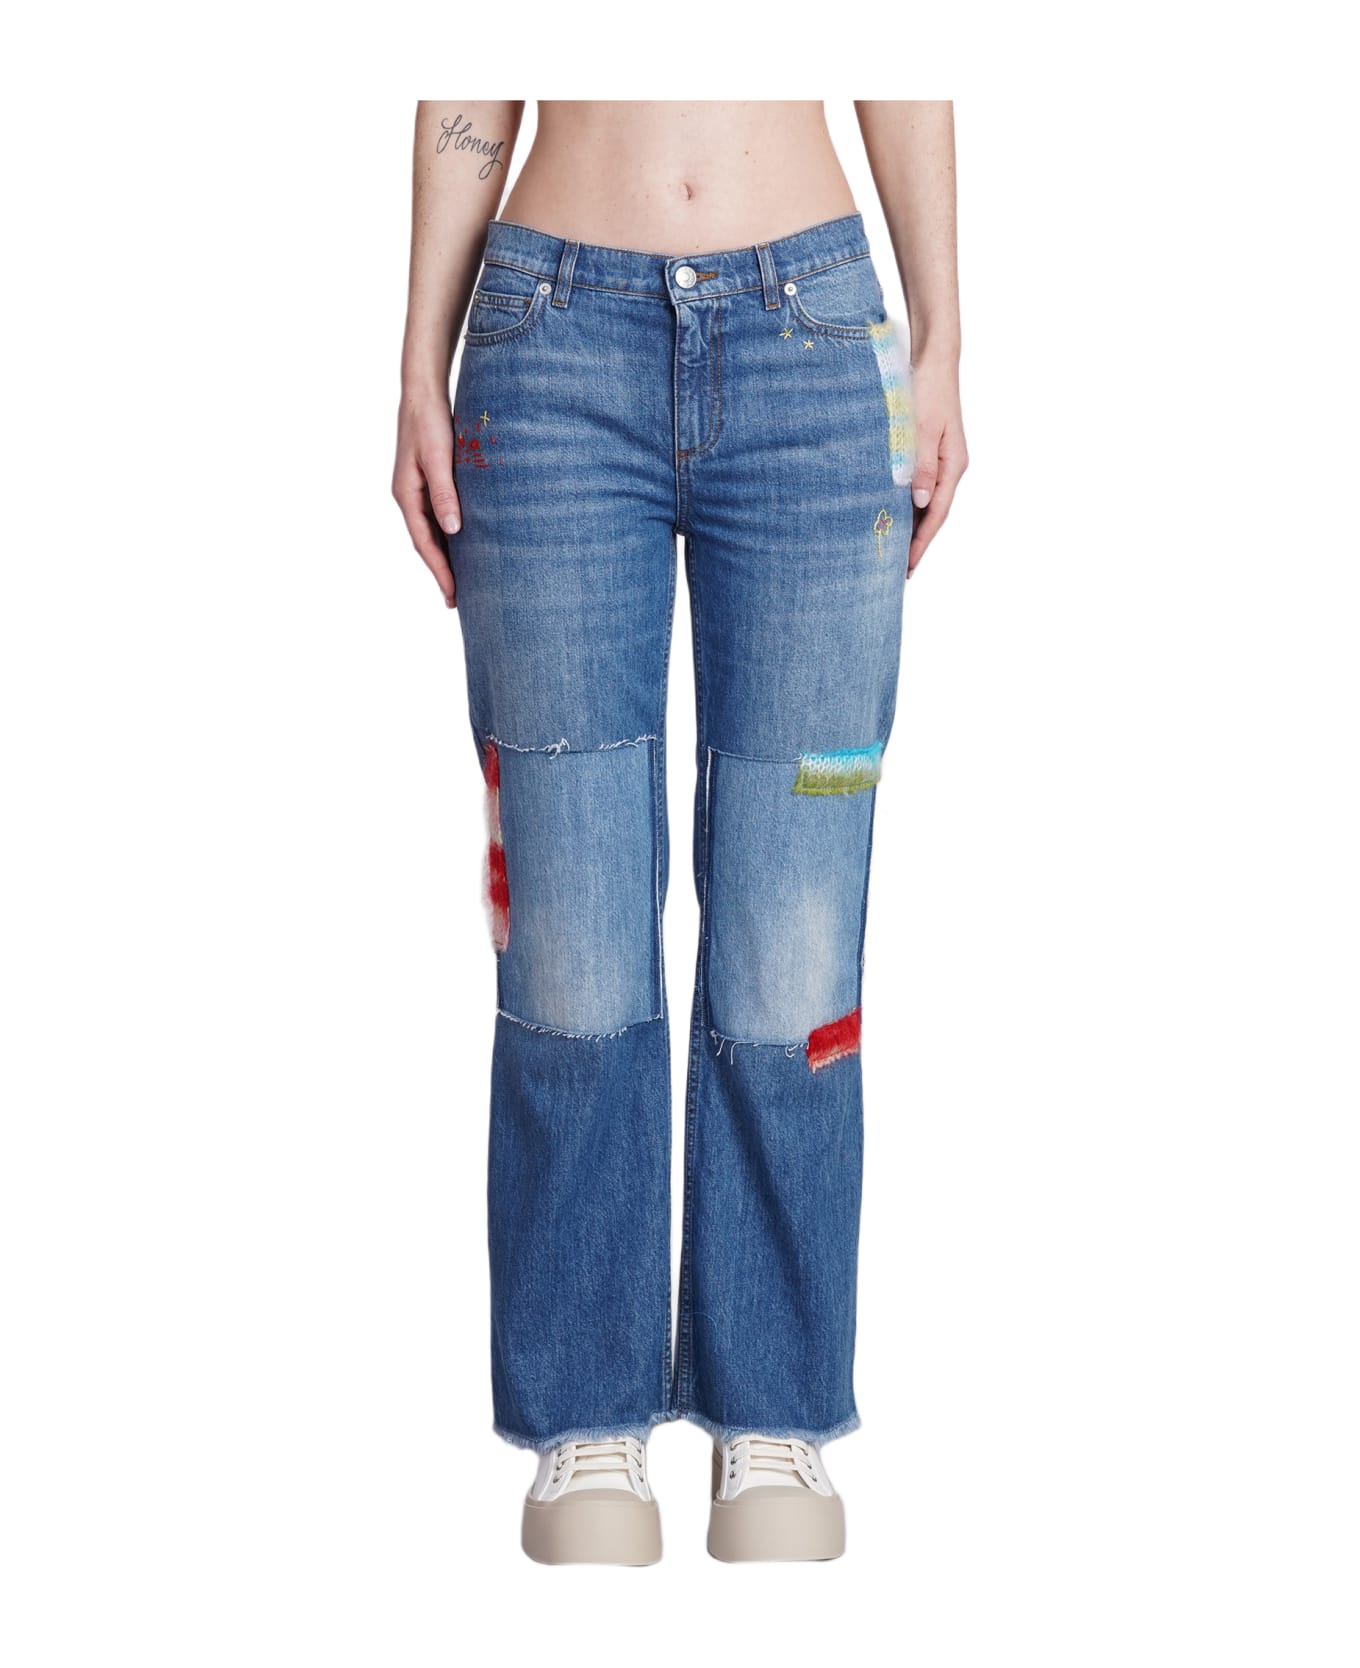 Marni Jeans In Blue Cotton - BLUE MIX デニム